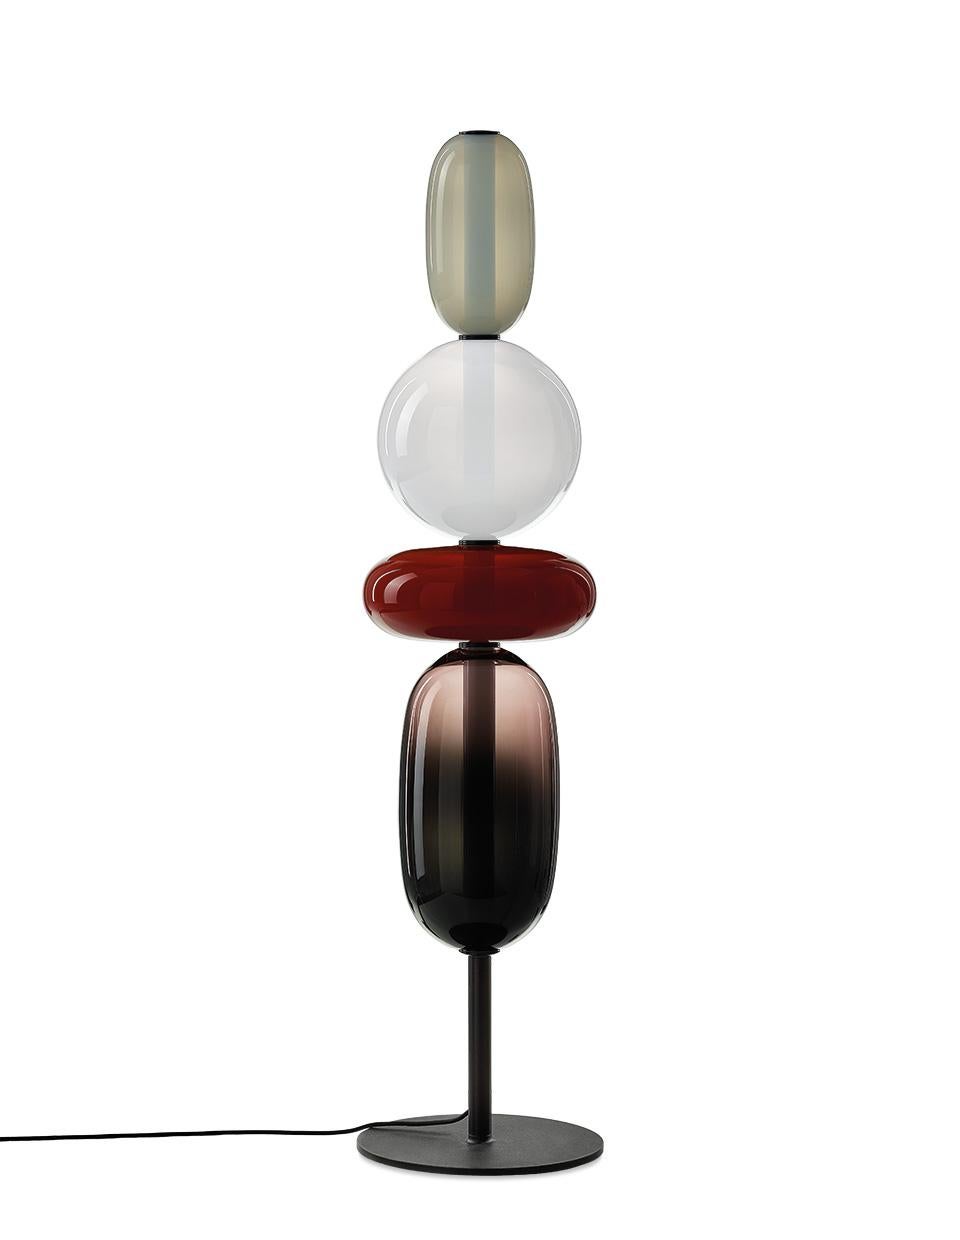 Contemporary blown crystal glass floor lamp - Pebbles by Boris Klimek for Bomma

Pebbles are reminders of exceptional moments or favorite places. Their diverse shapes and colors inspired BOMMA’s playful collection that invites you to express your